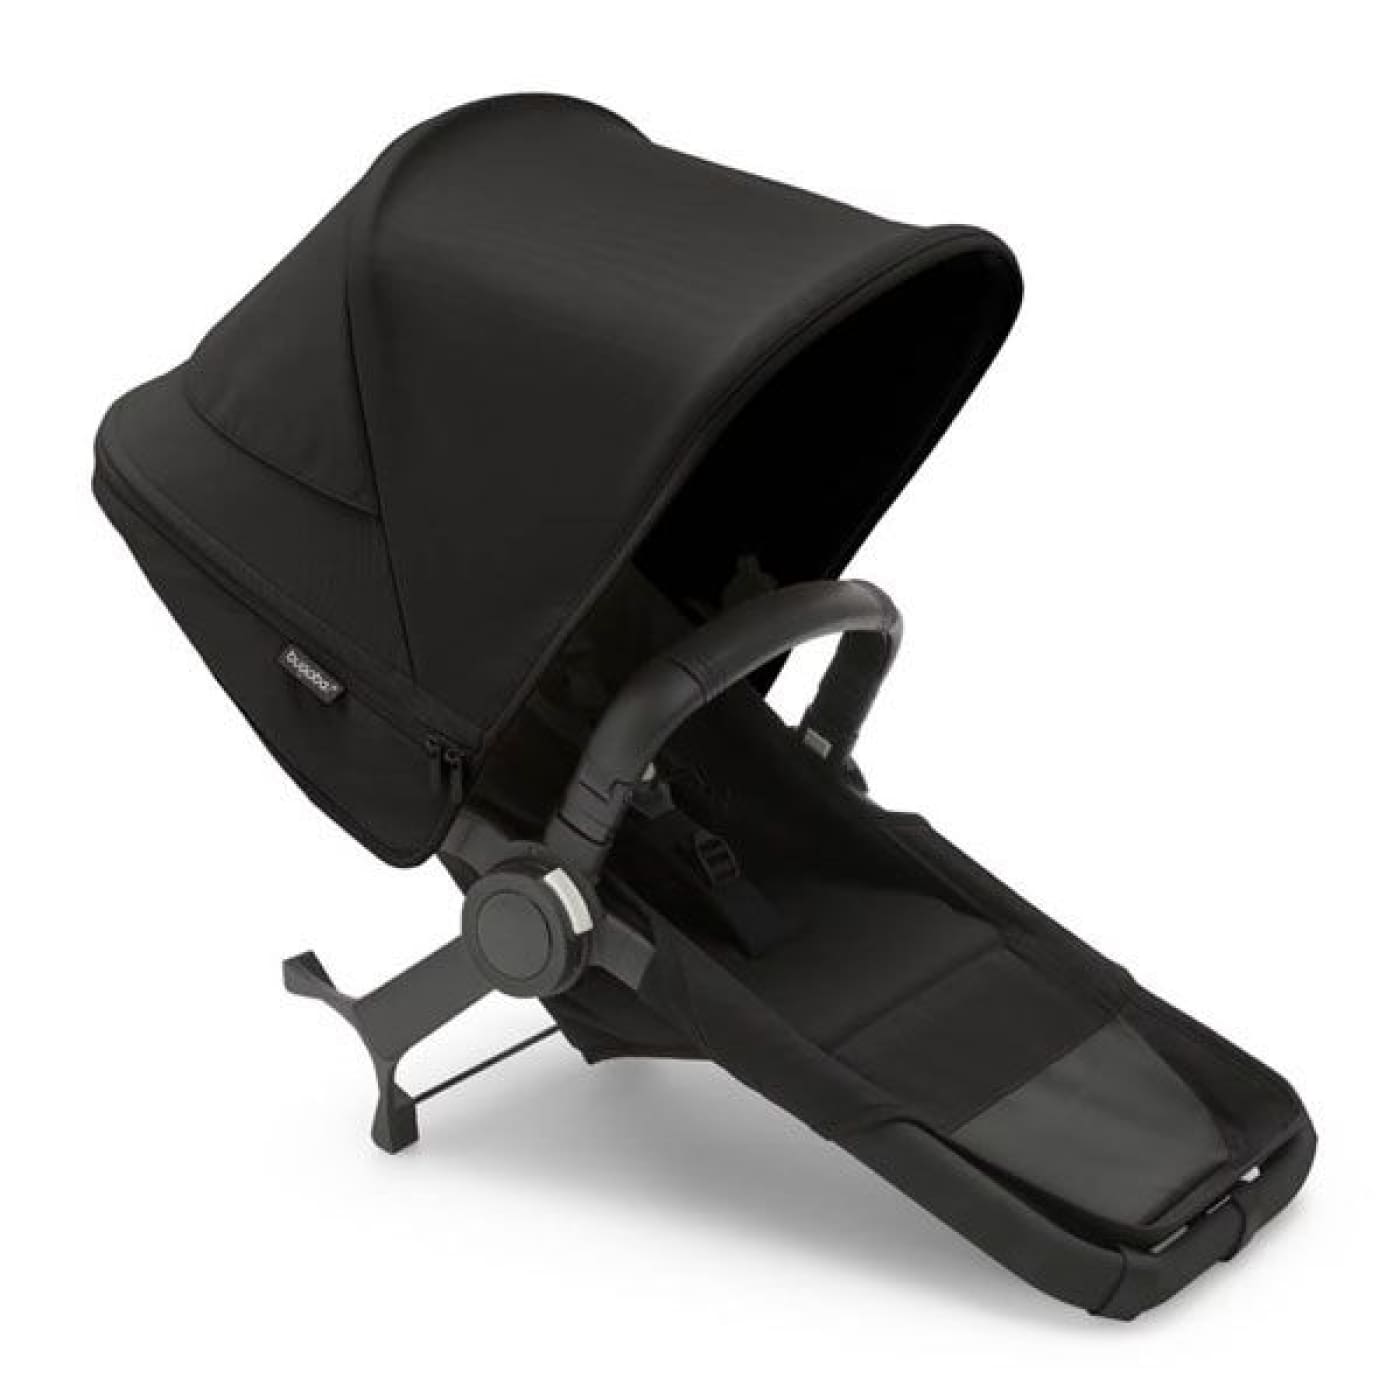 Bugaboo Donkey 5 Duo Extension Complete - Midnight Black - PRAMS & STROLLERS - TODDLER SEATS/CONVERSION KITS